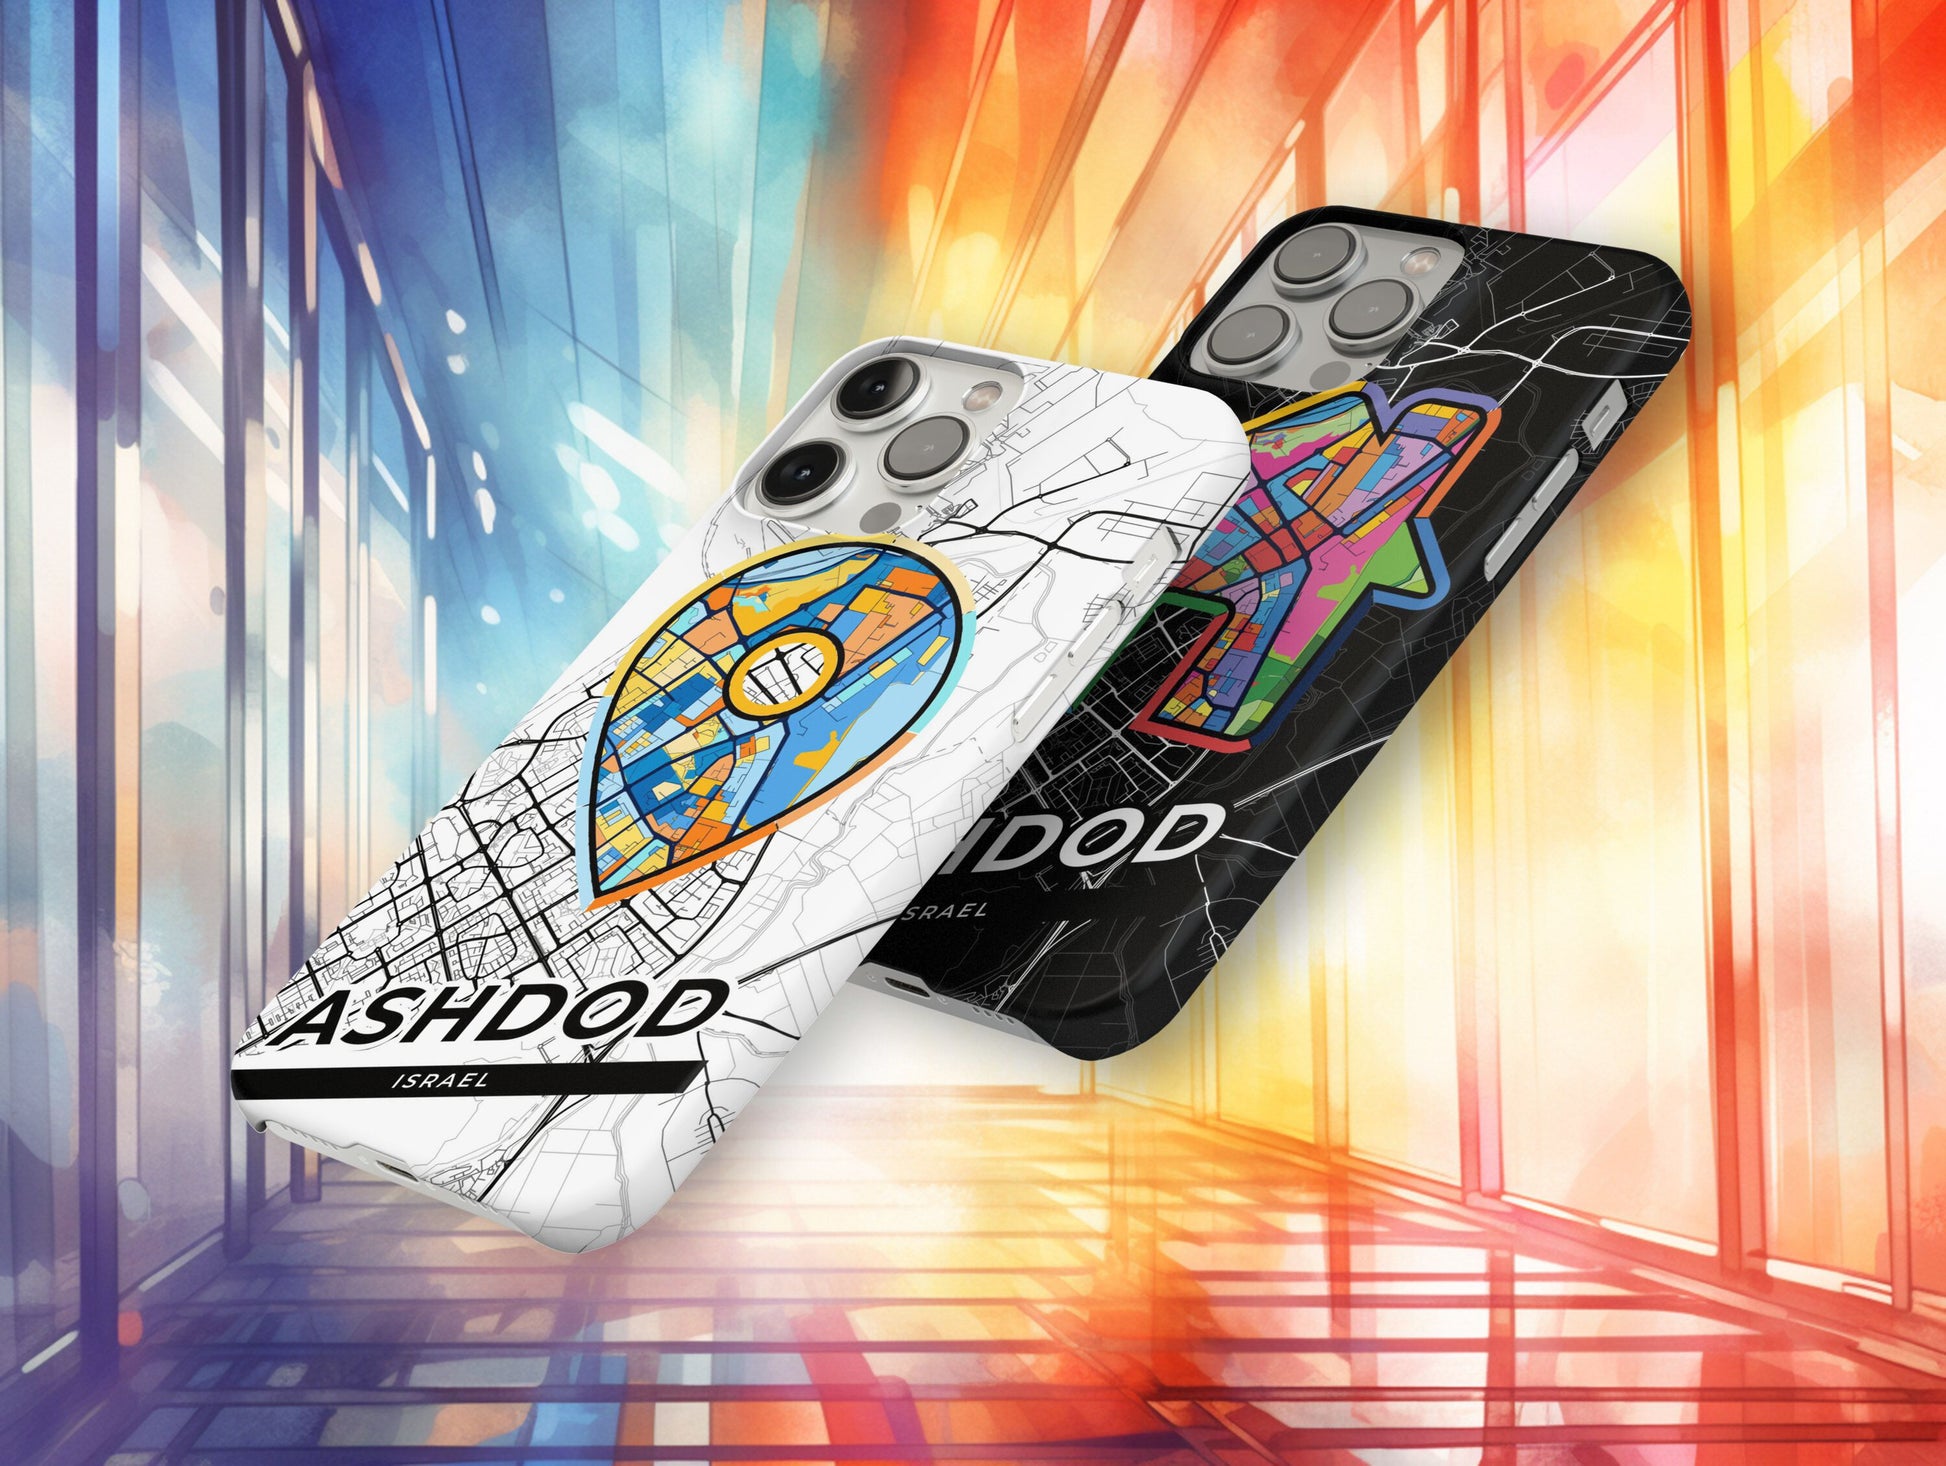 Ashdod Israel slim phone case with colorful icon. Birthday, wedding or housewarming gift. Couple match cases.